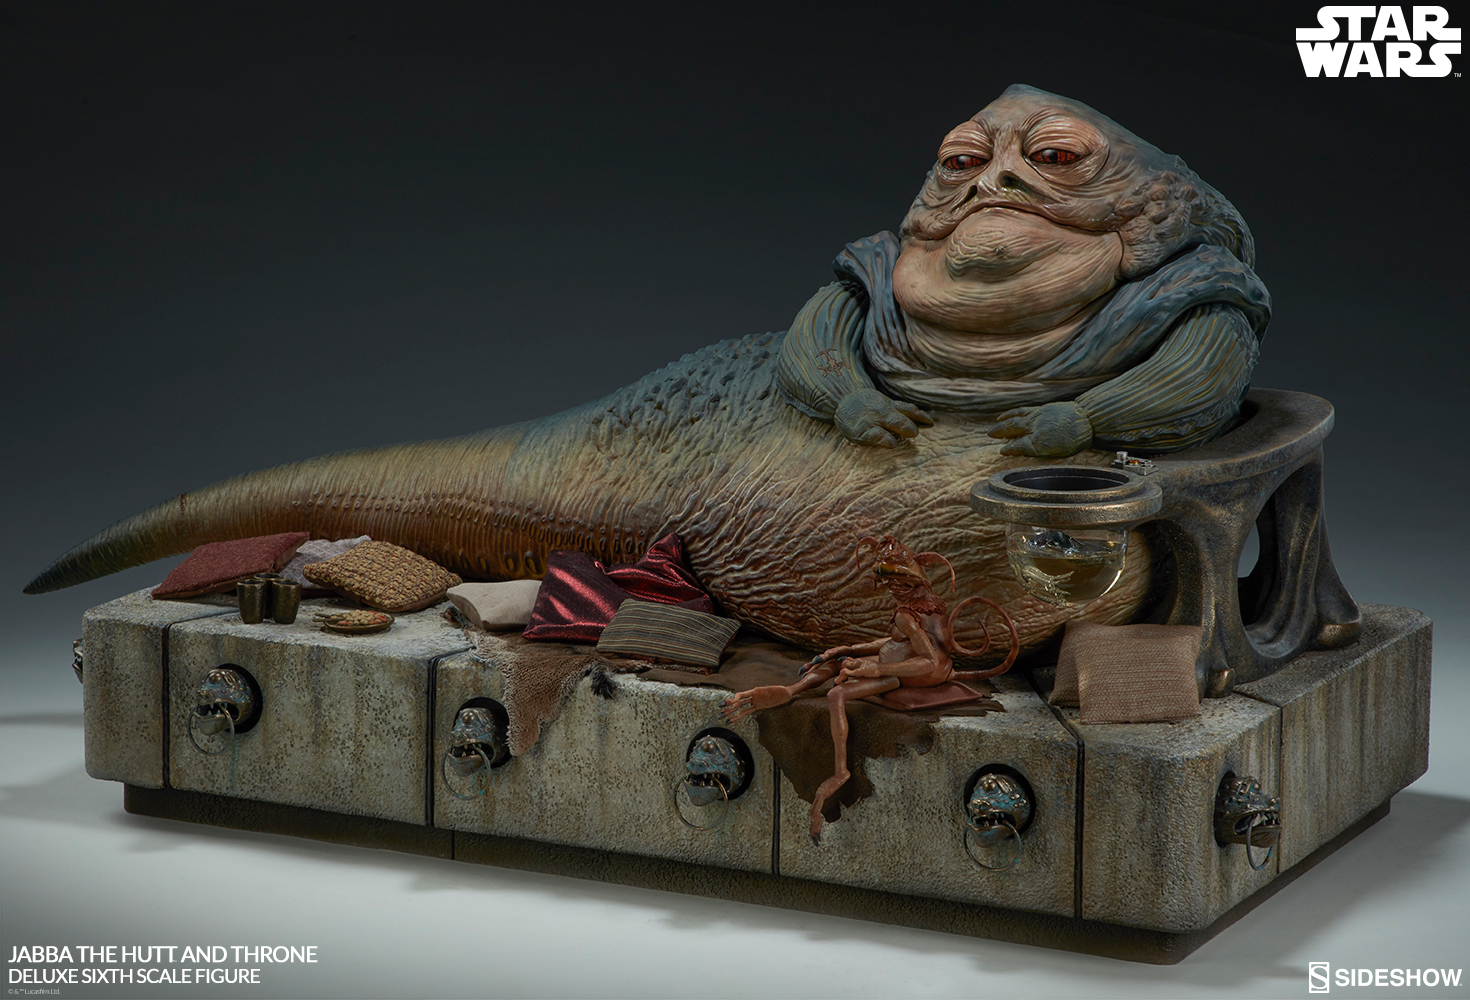 Star Wars Episode VI : Jabba the Hutt and throne - Deluxe Figure (Sideshow) Znrk2DY9_o